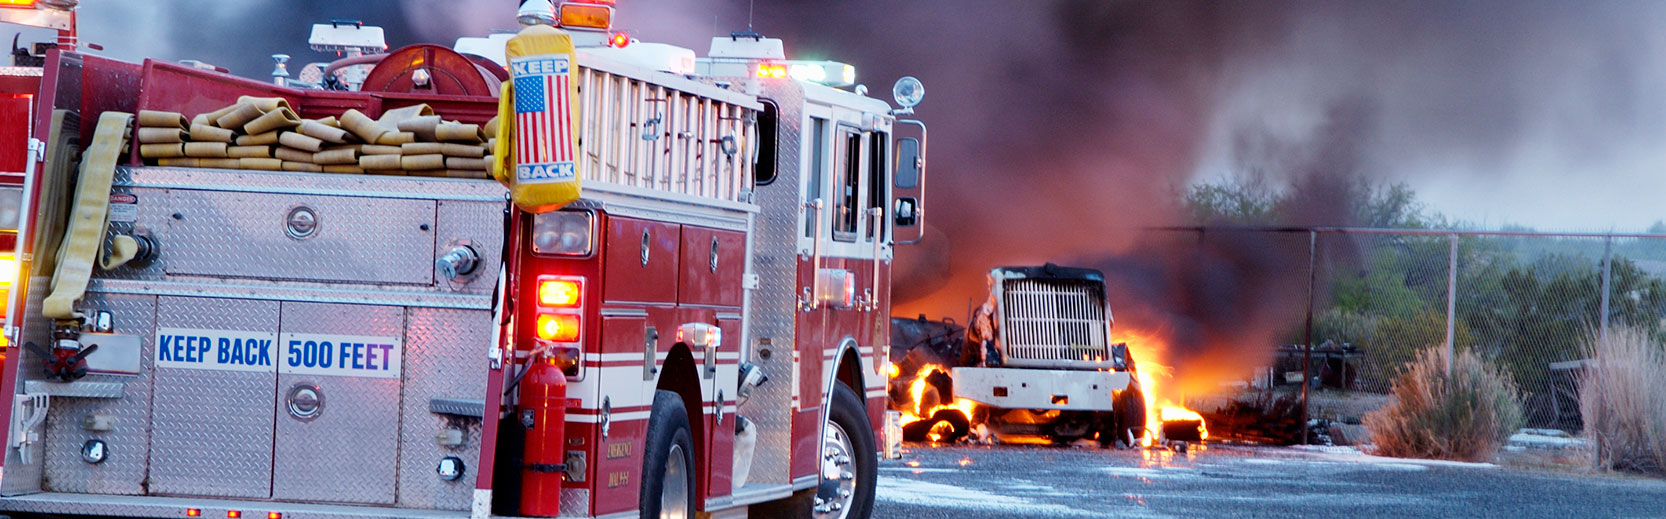 truck accident with fire truck and semi truck on fire